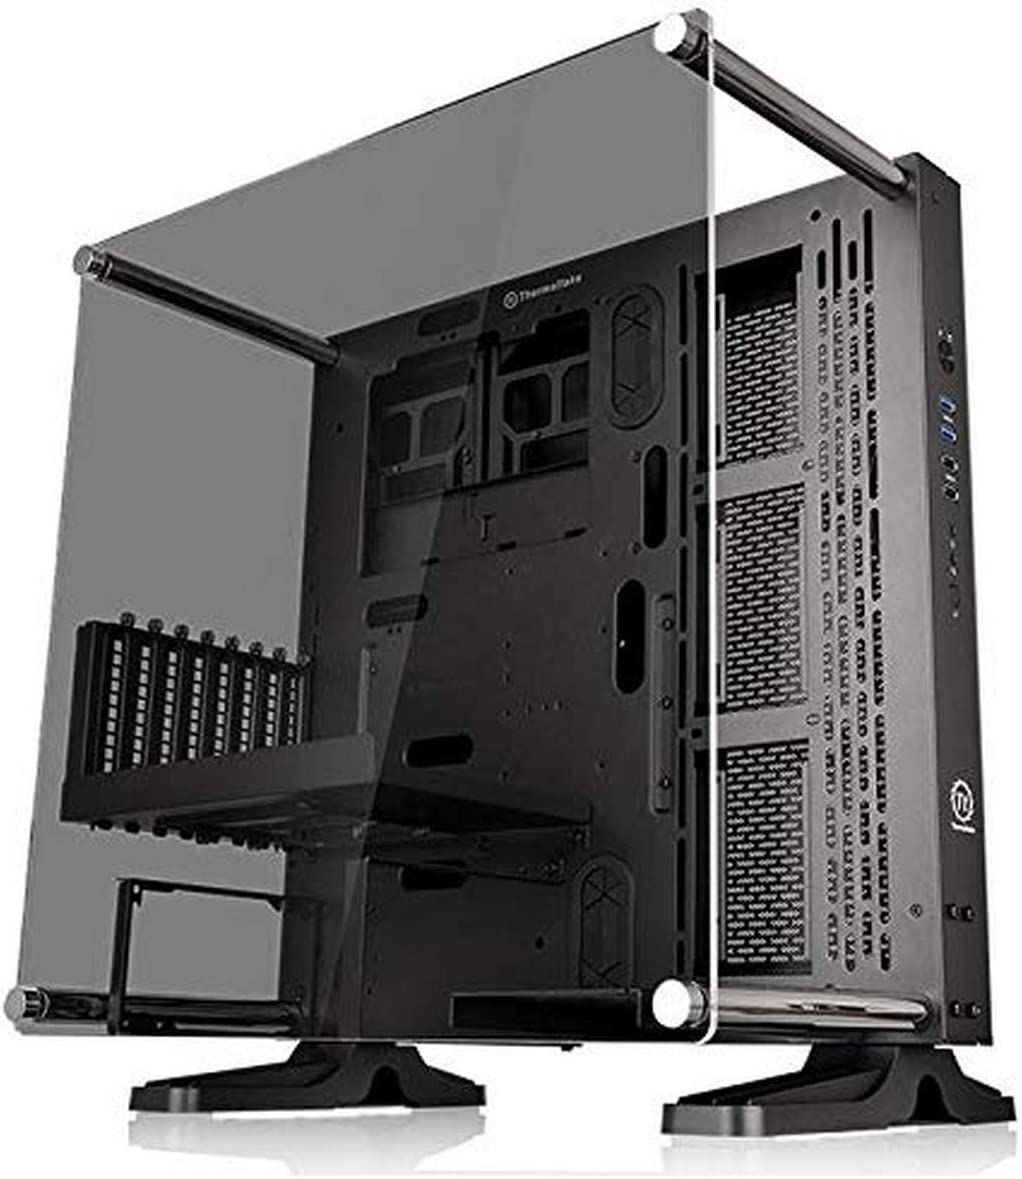 Thermaltake ATX Open Frame Tempered Glass PC Case